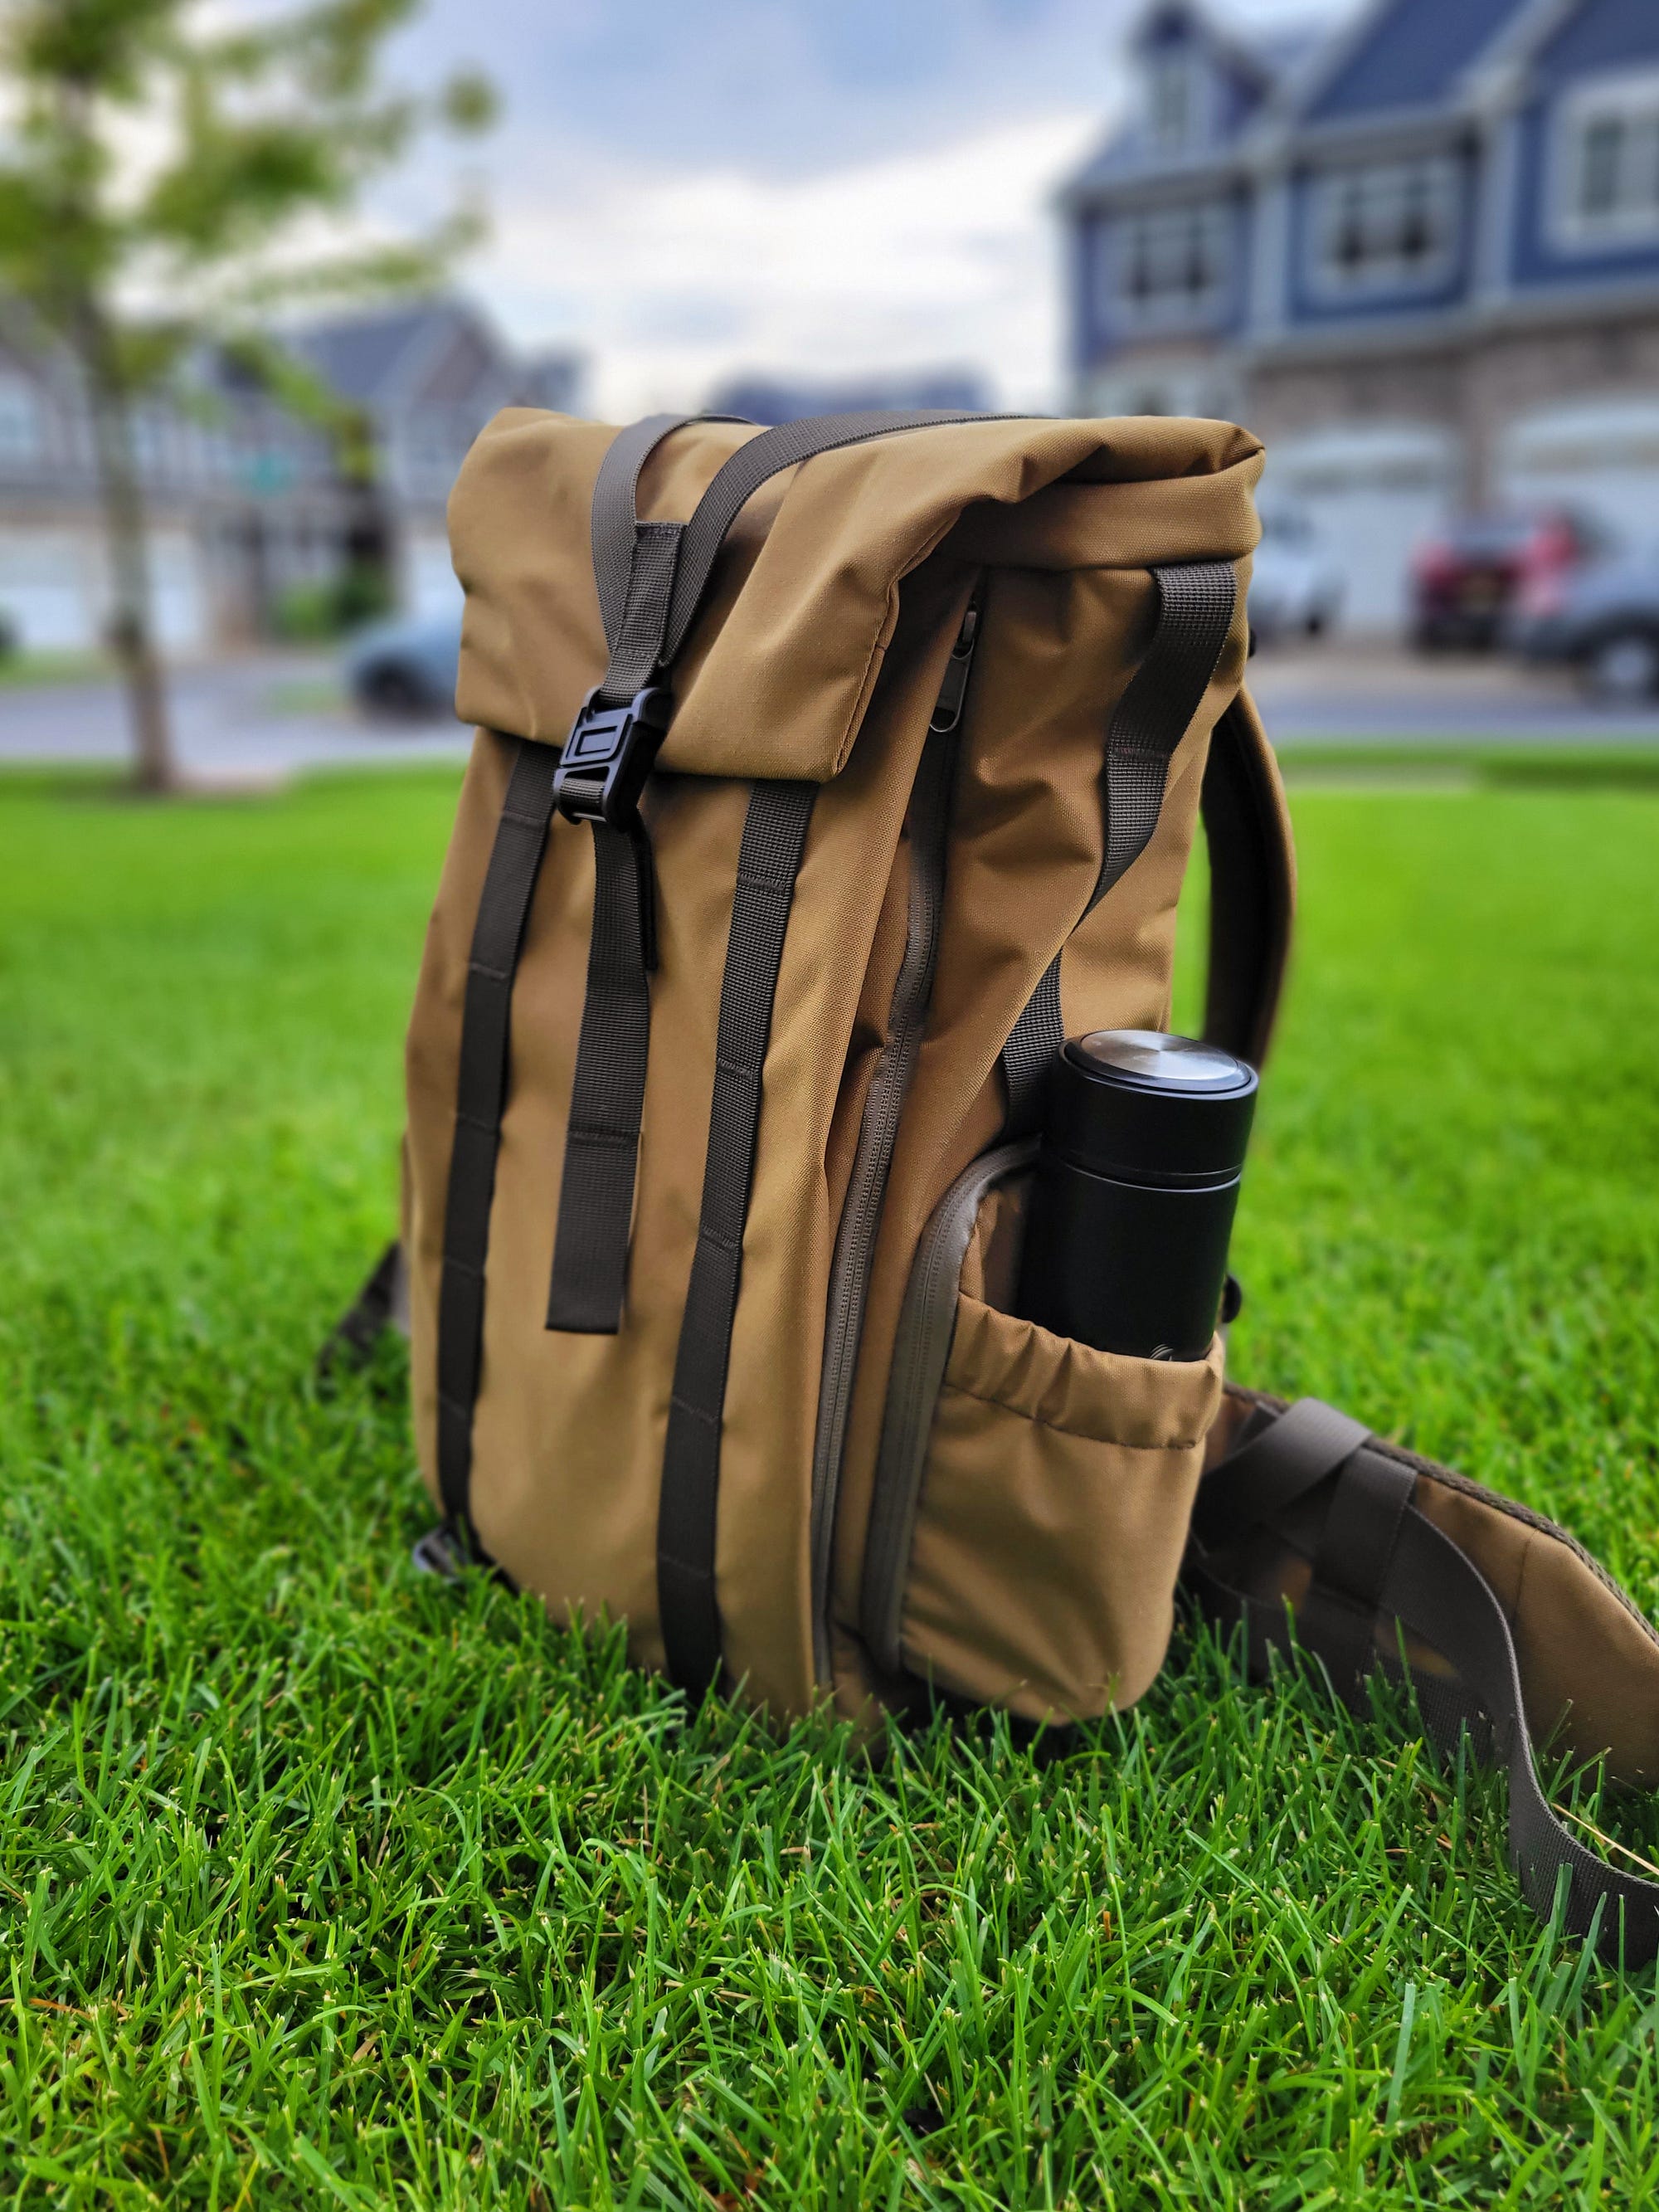 Wotancraft Pilot 18 Backpack Review, by Geoff